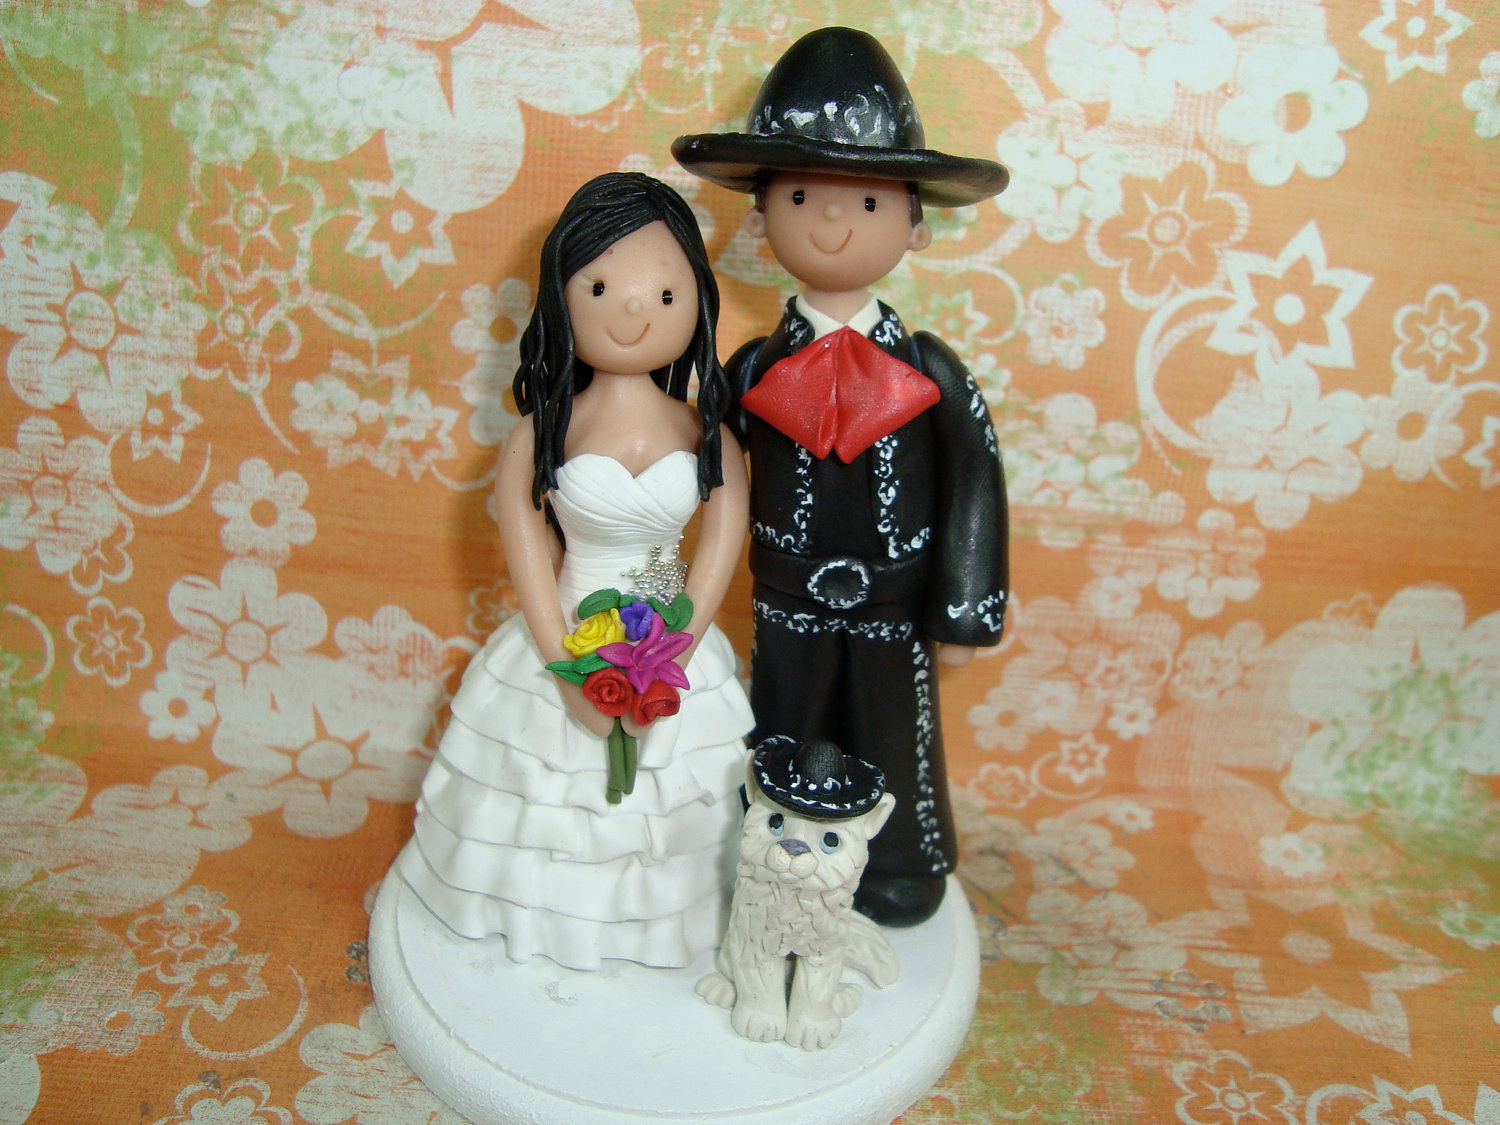 Mexican Wedding Cake Toppers
 Custom Made Bride and Groom Wedding Cake Topper by mudcards